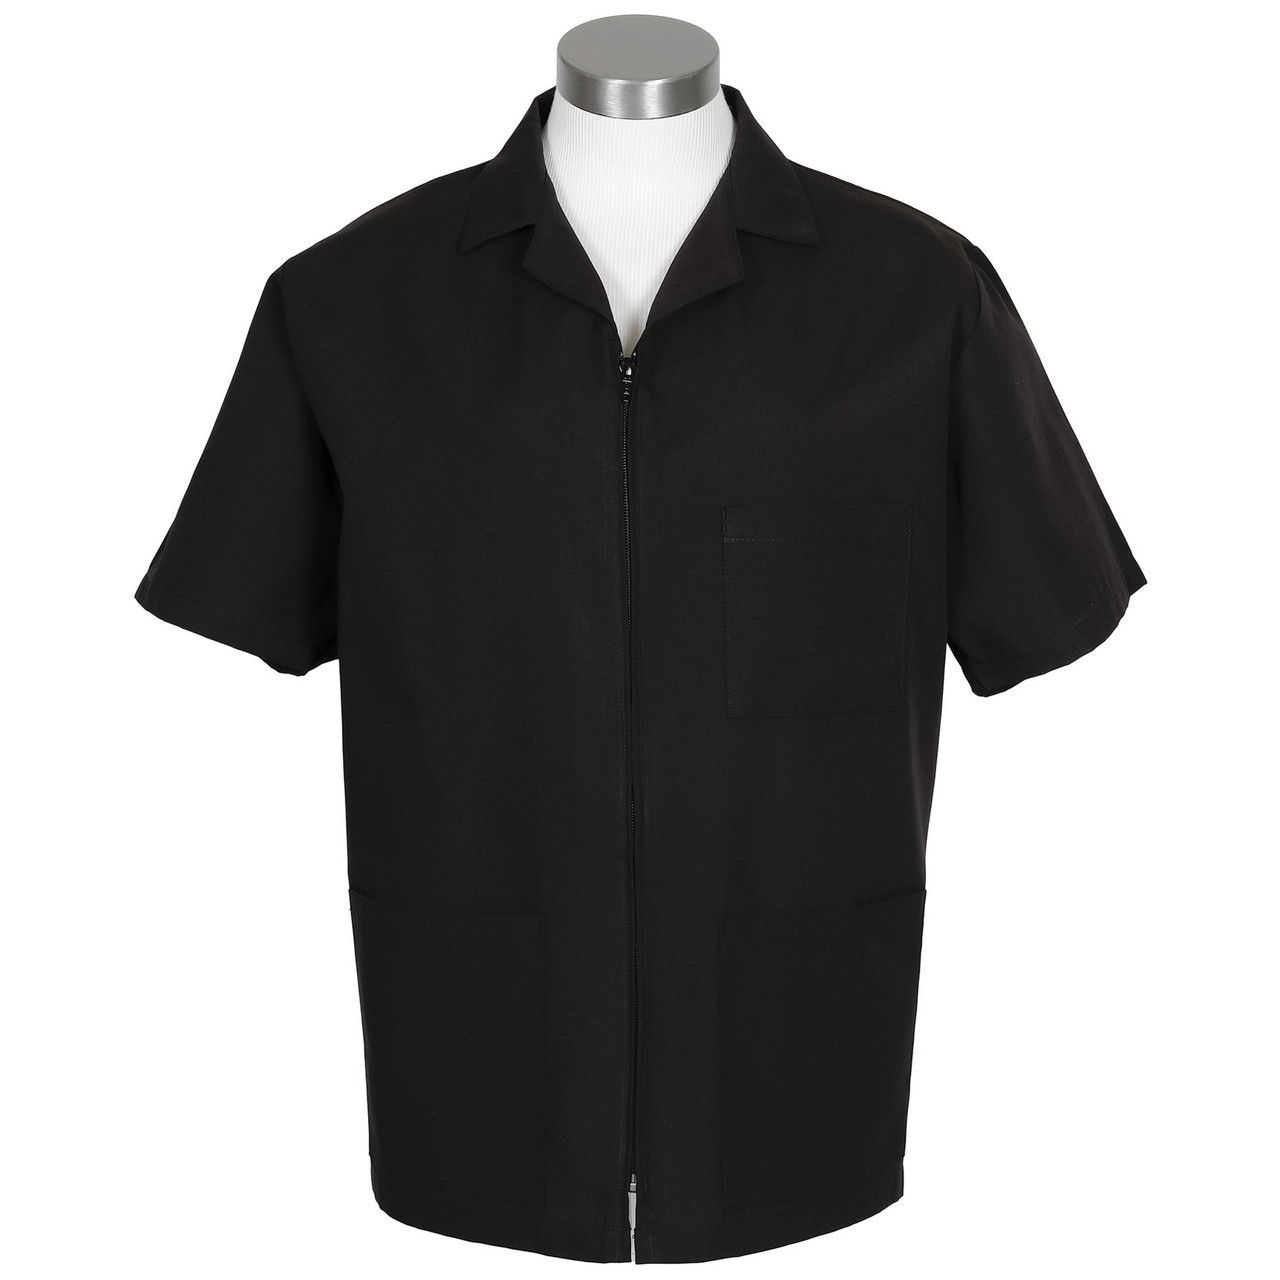 Can the black smock handle various job conditions?